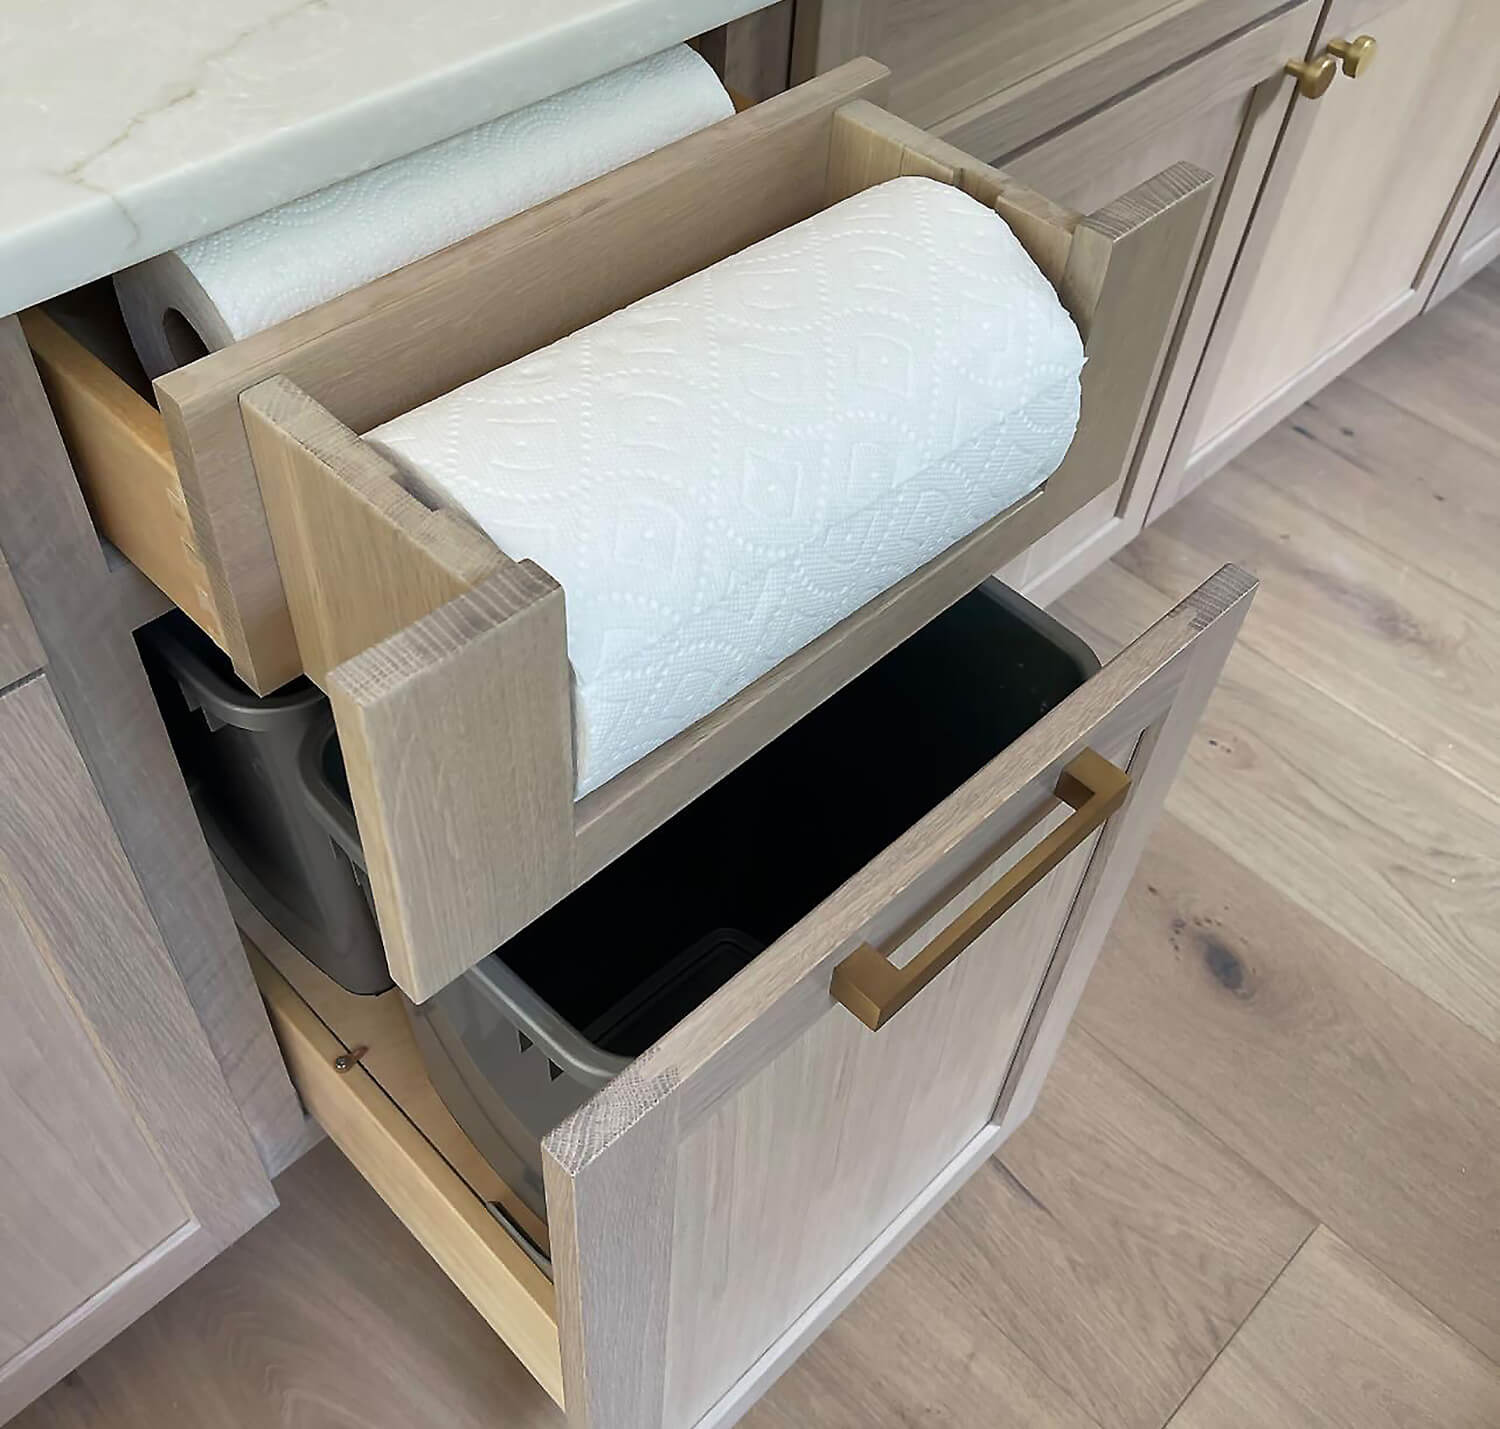 White Oak cabinets shown close up with a pull-out trash bin cabinet below a paper towel dispenser drawer that includes additional drawer storage for extra paper towels and misc. kitchen storage.